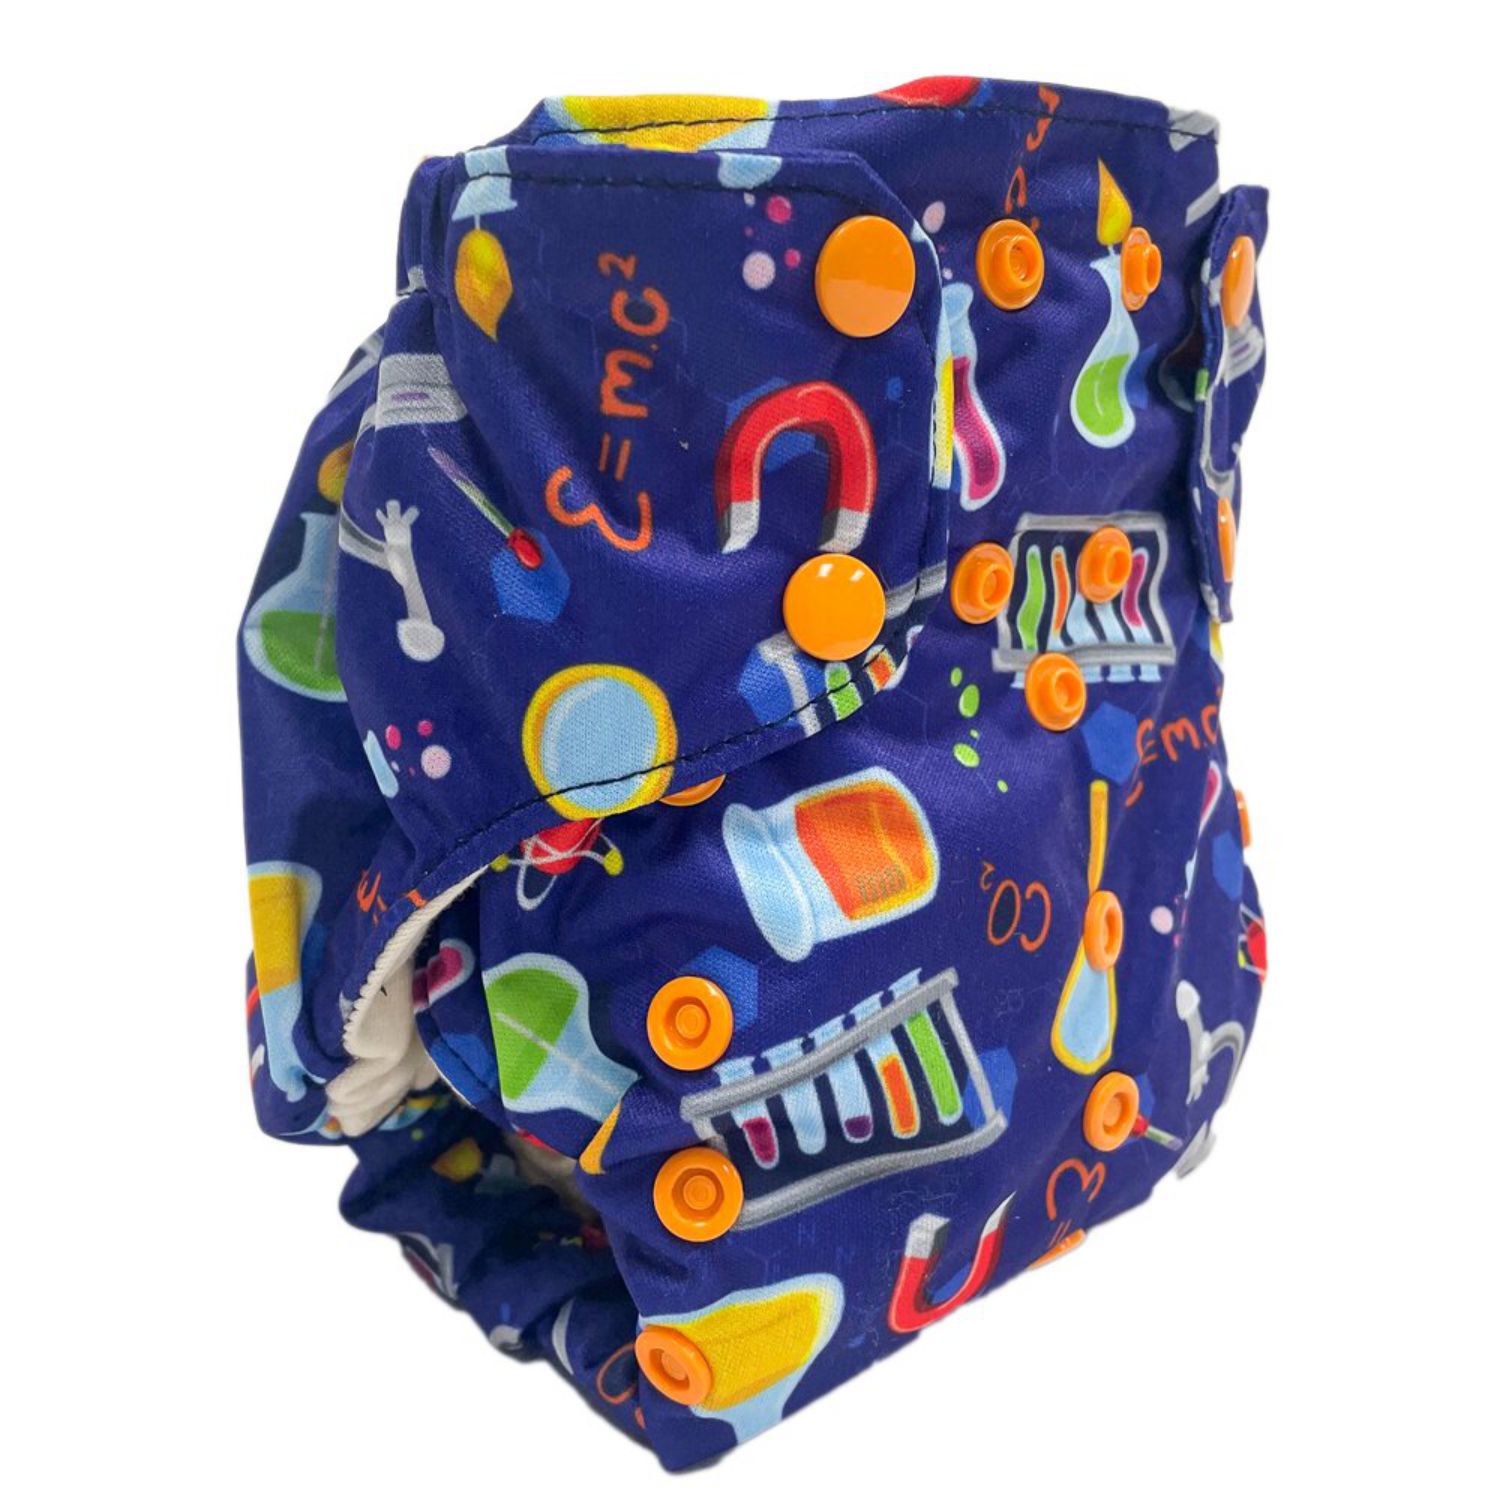 Smart Bottoms 3.1 One Size All-in-One nappy Pattern: Periodically